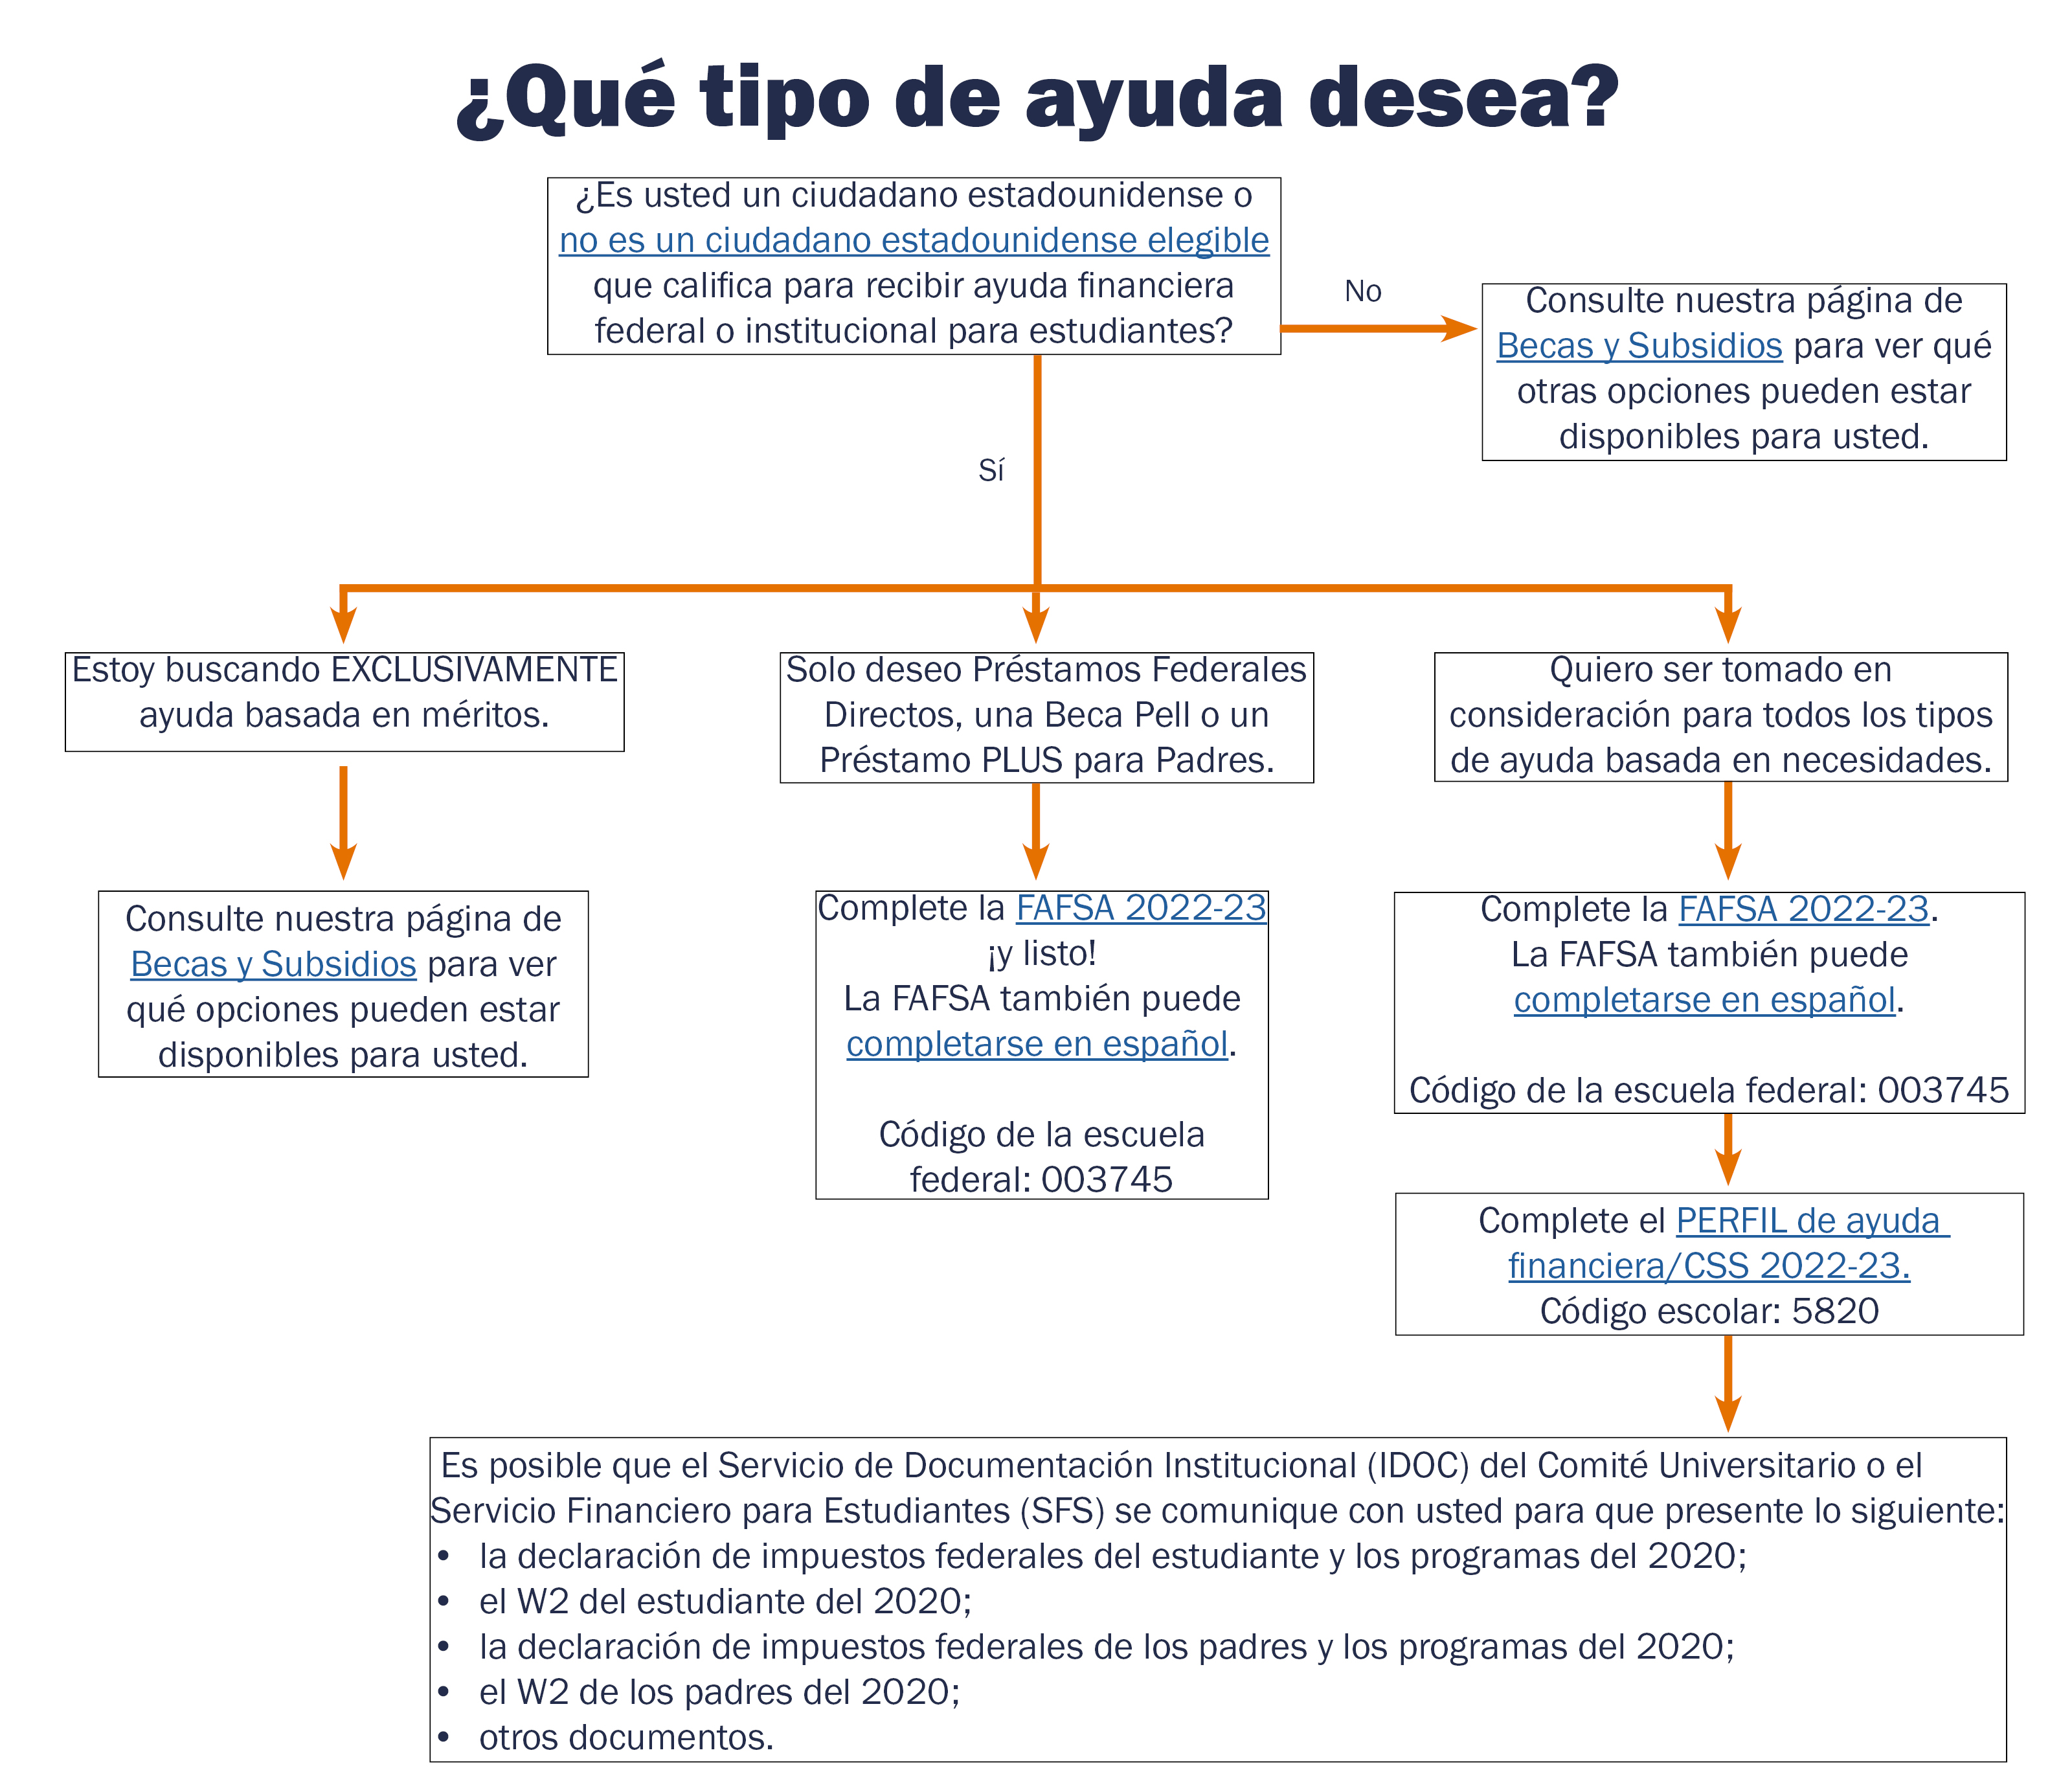 A flow chart is displayed containing the information below on how to apply for financial aid at UVA.